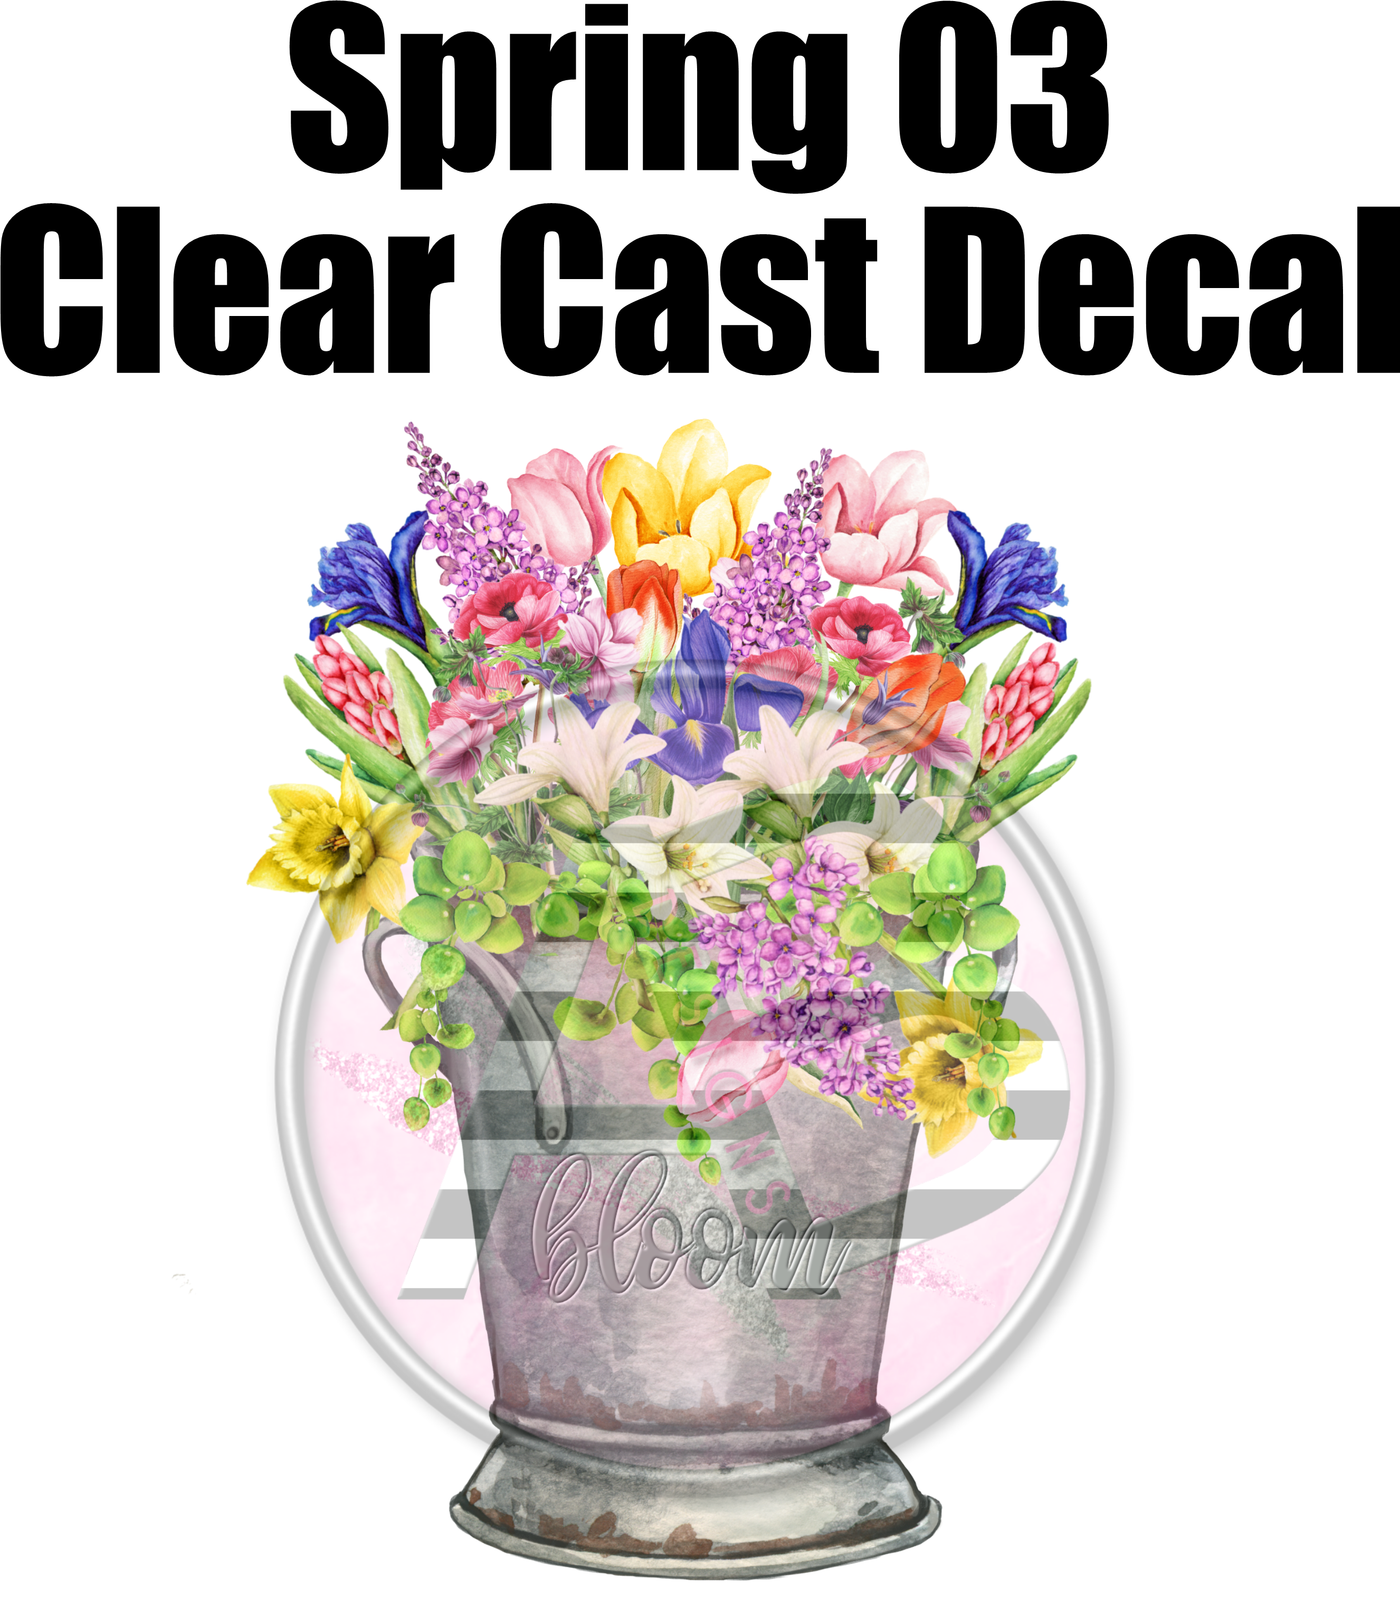 Spring 03 - Clear Cast Decal